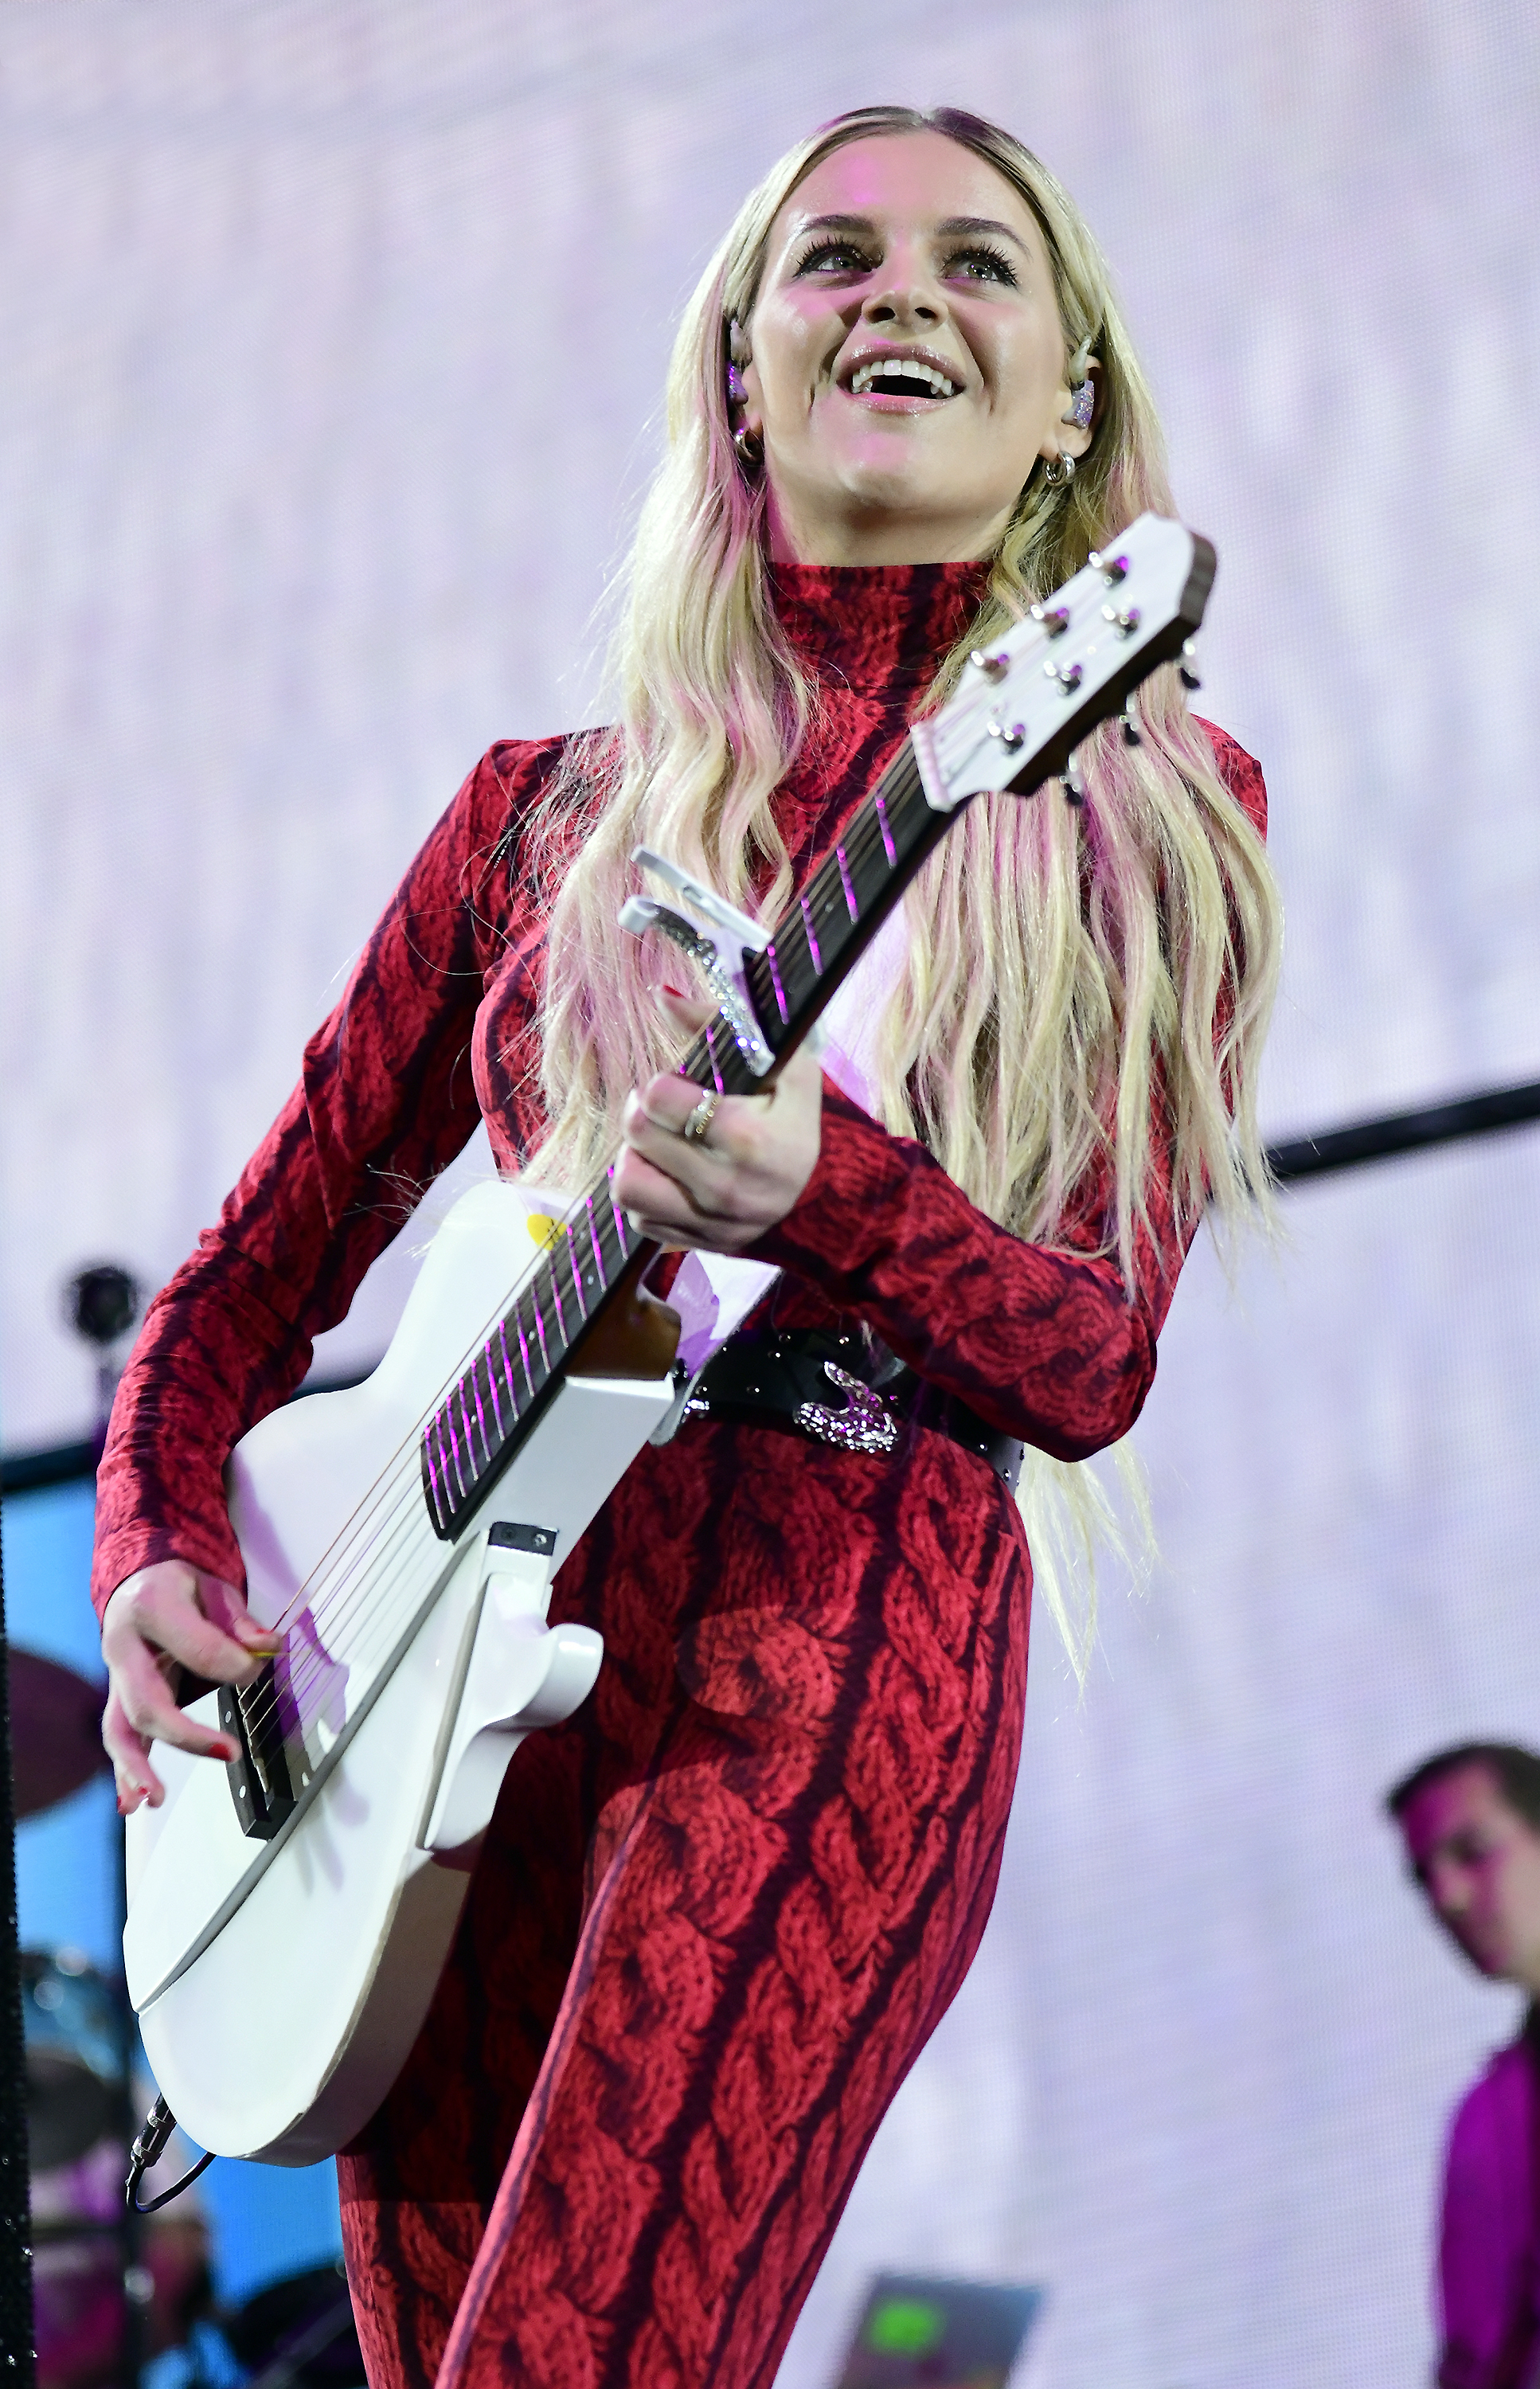 Kelsea playing the guitar on stage